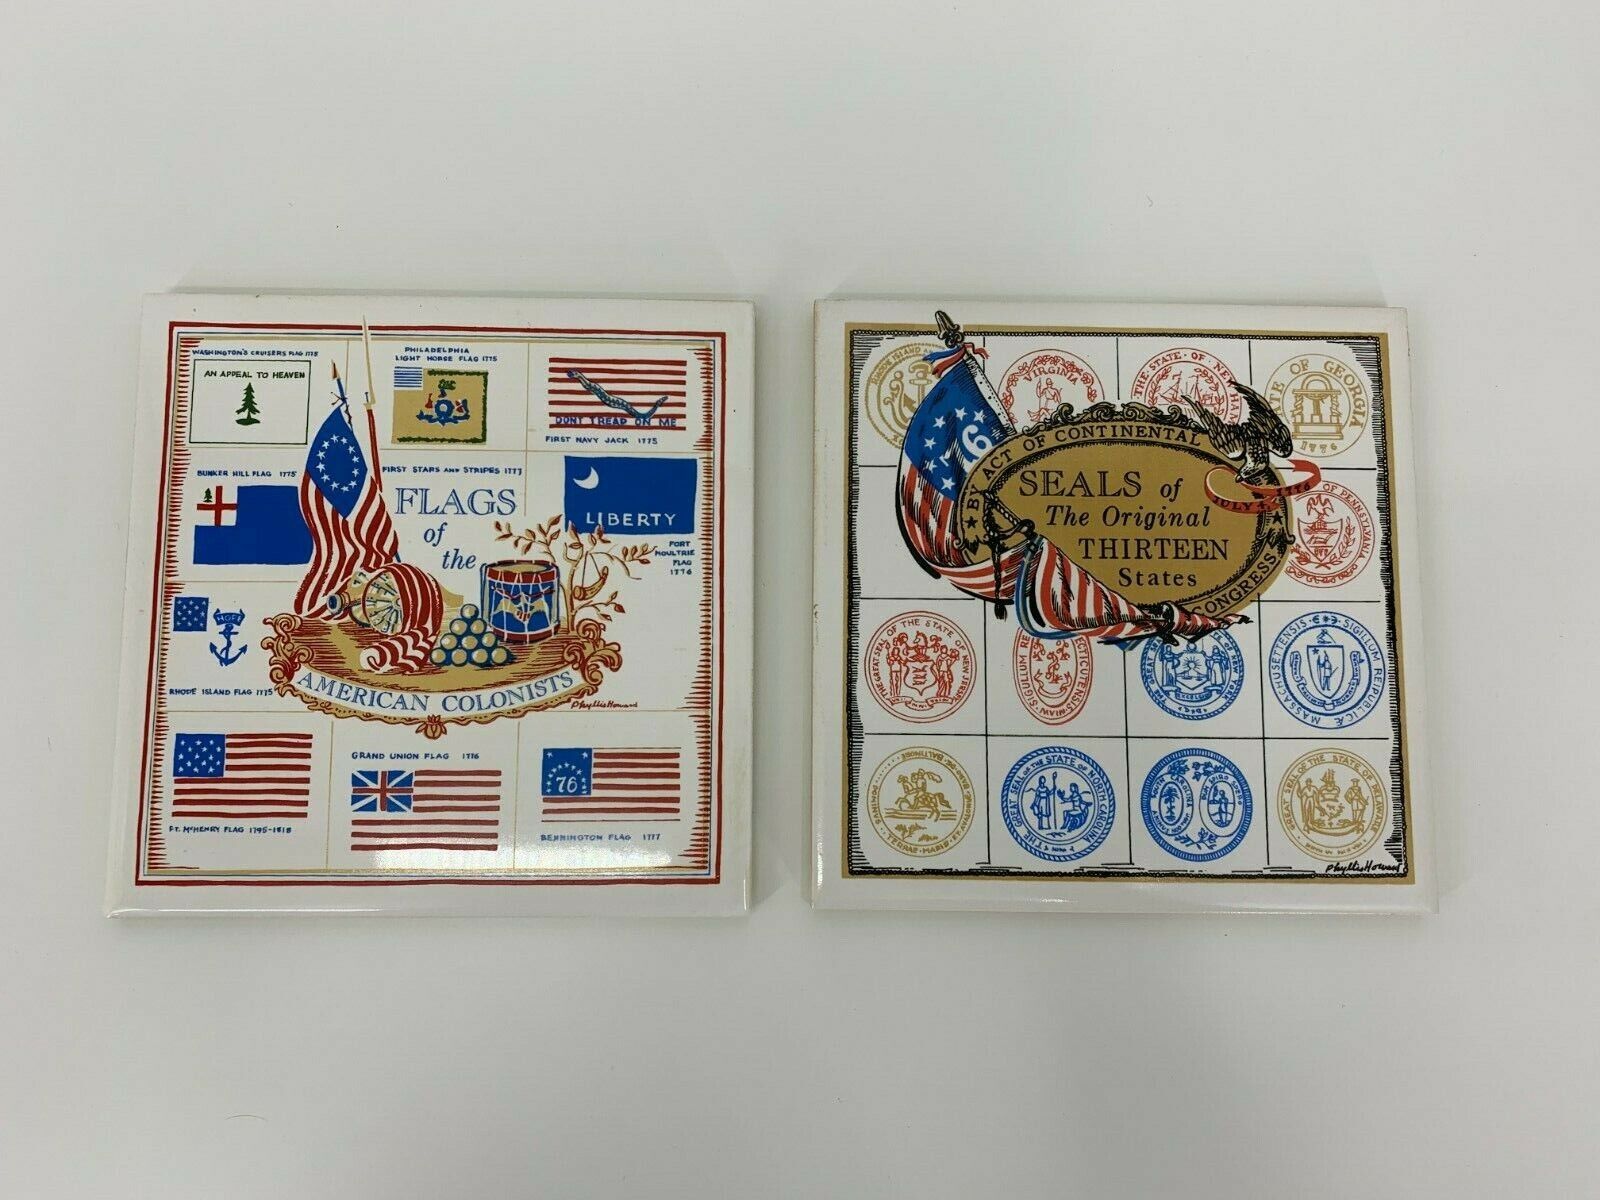 Vintage Screen Craft Tile Cork Trivet - Flags of Colonists & Seals of 13 States